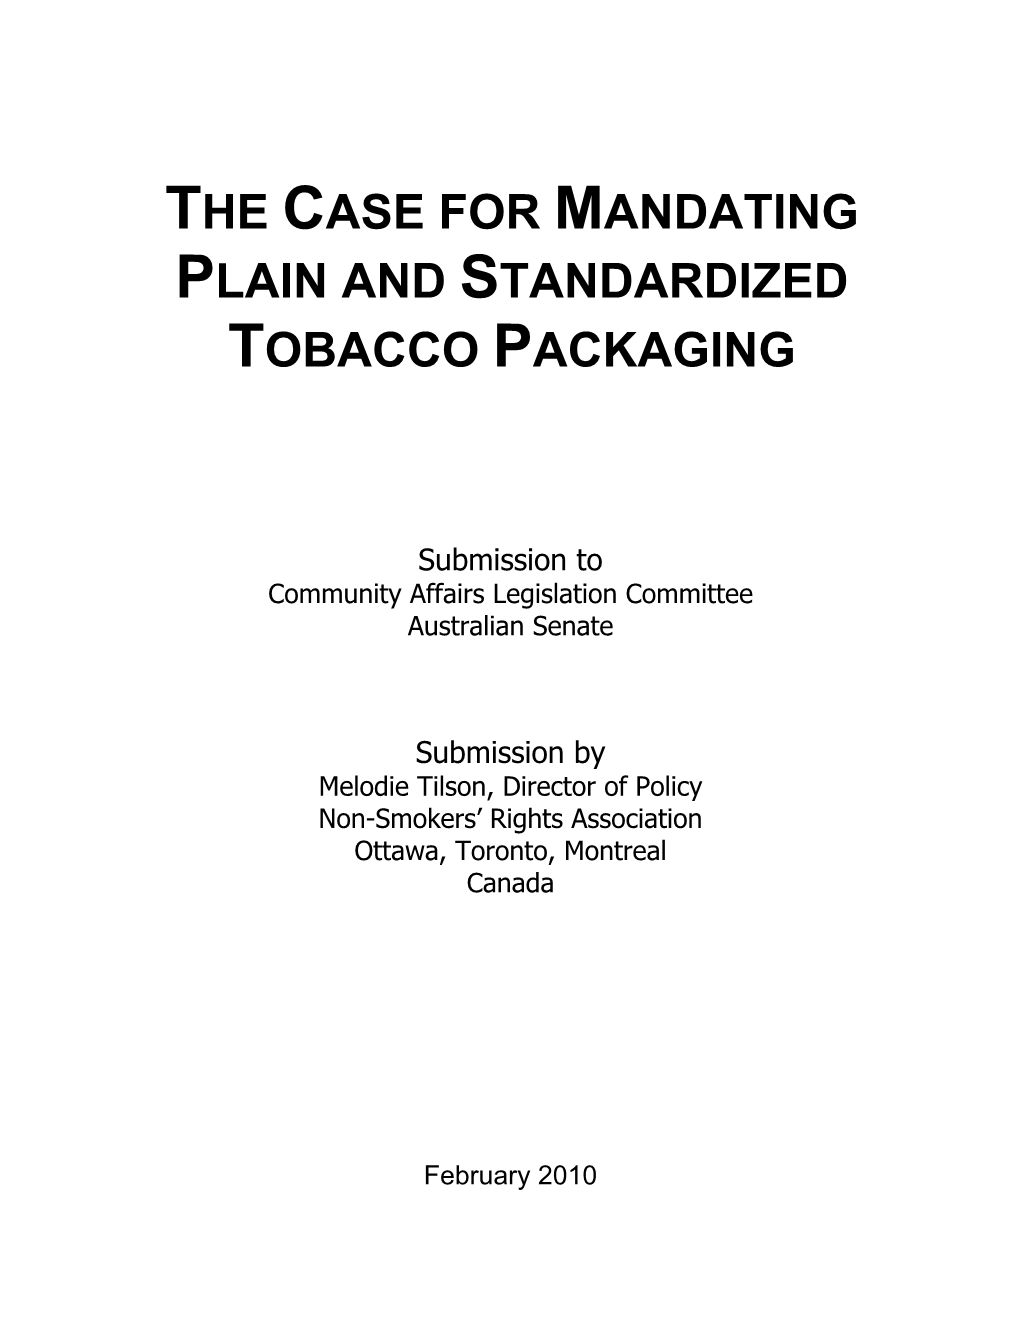 The Case for Mandating Plain and Standardized Tobacco Packaging